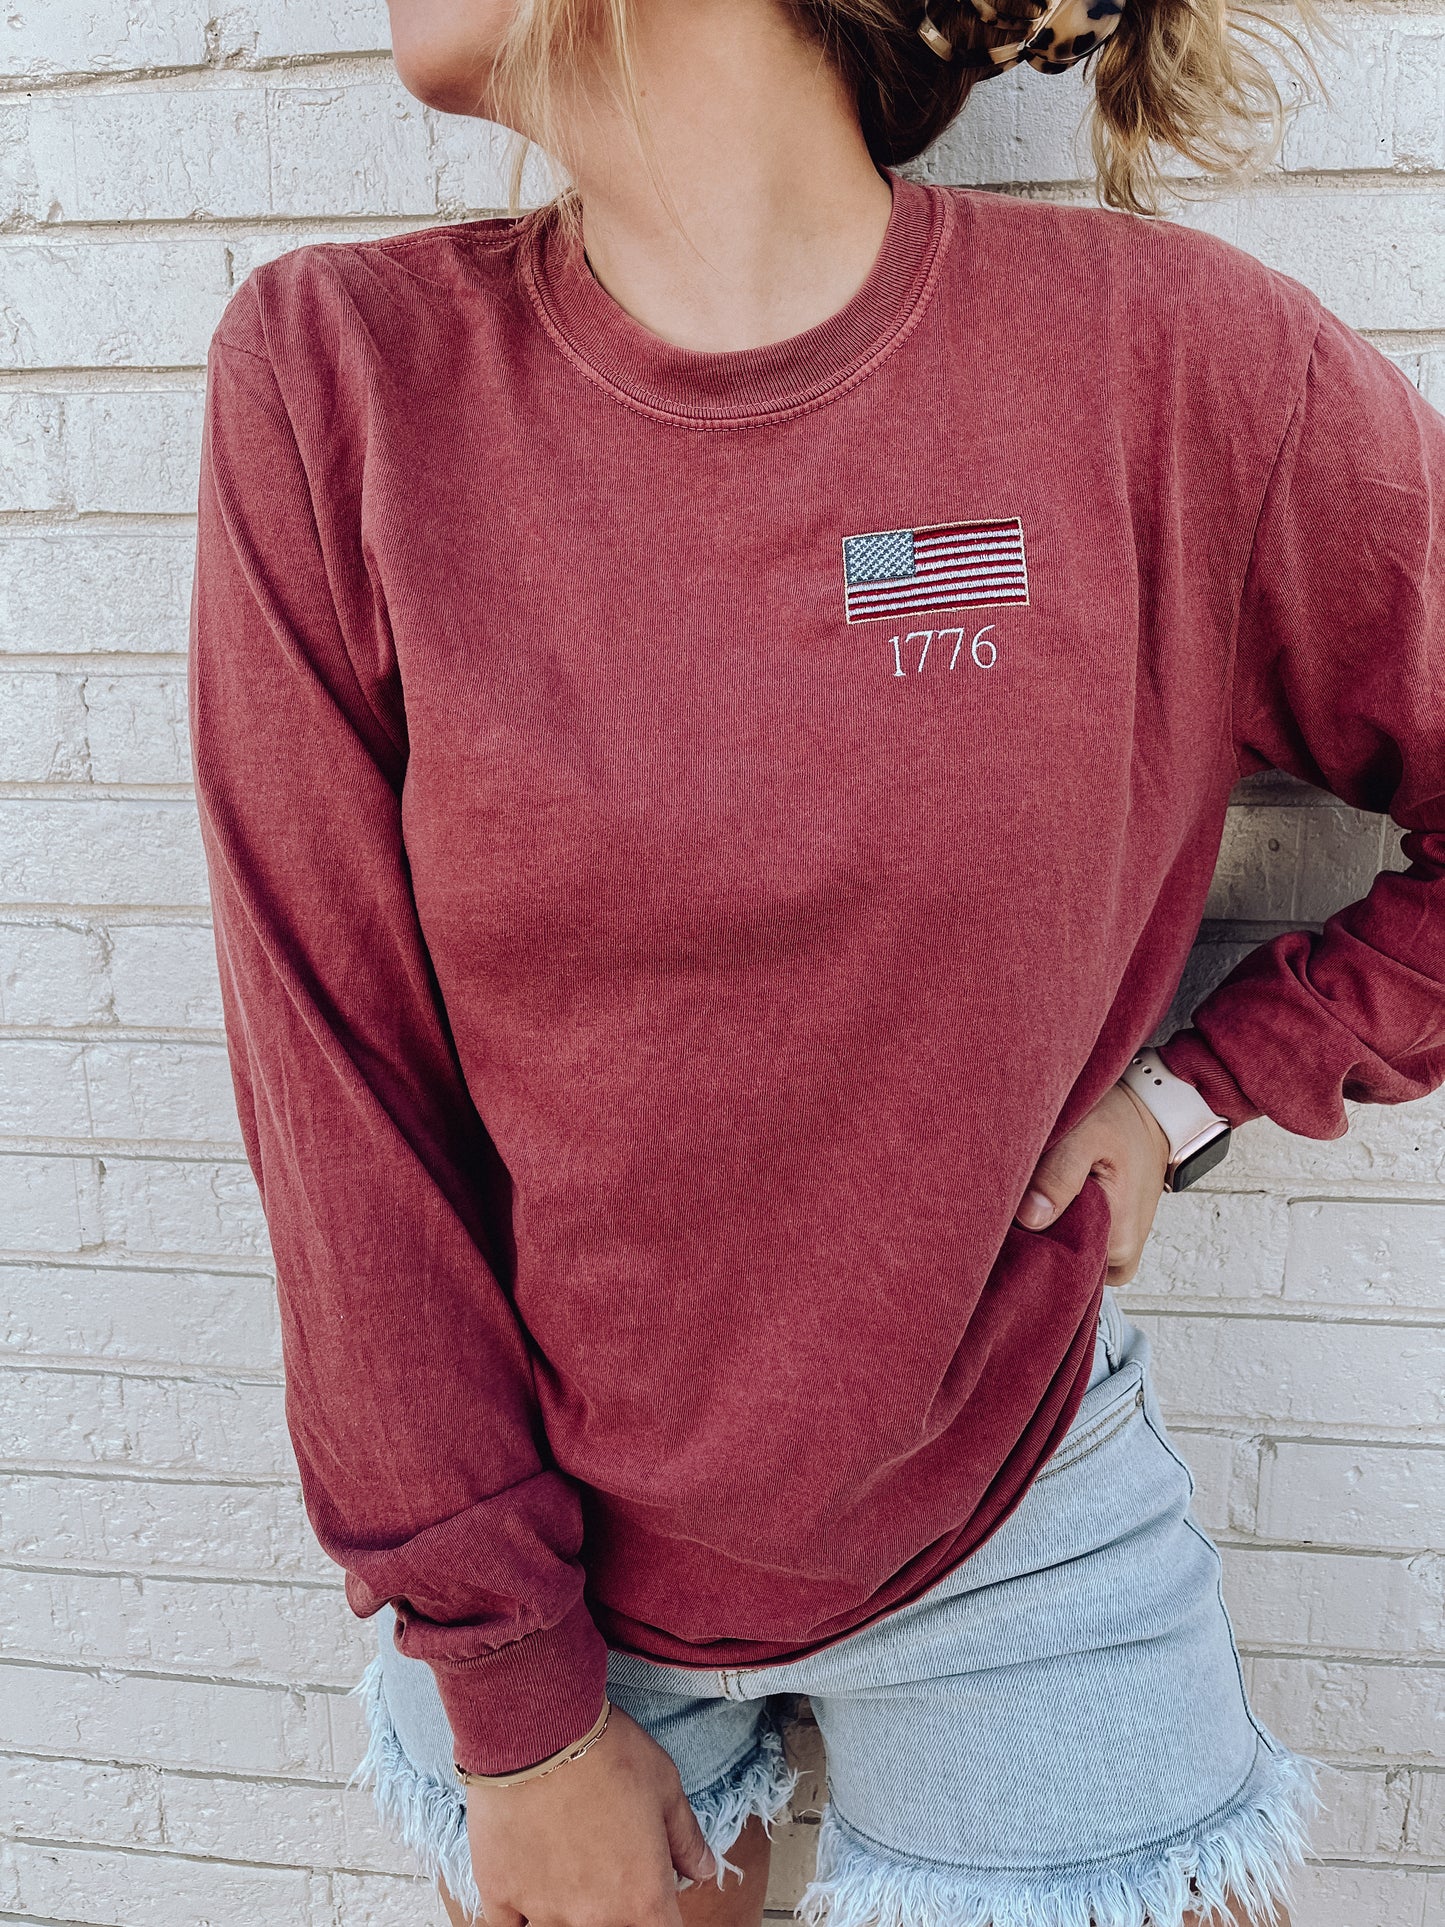 1776 Embroidered Tee // Long Sleeve